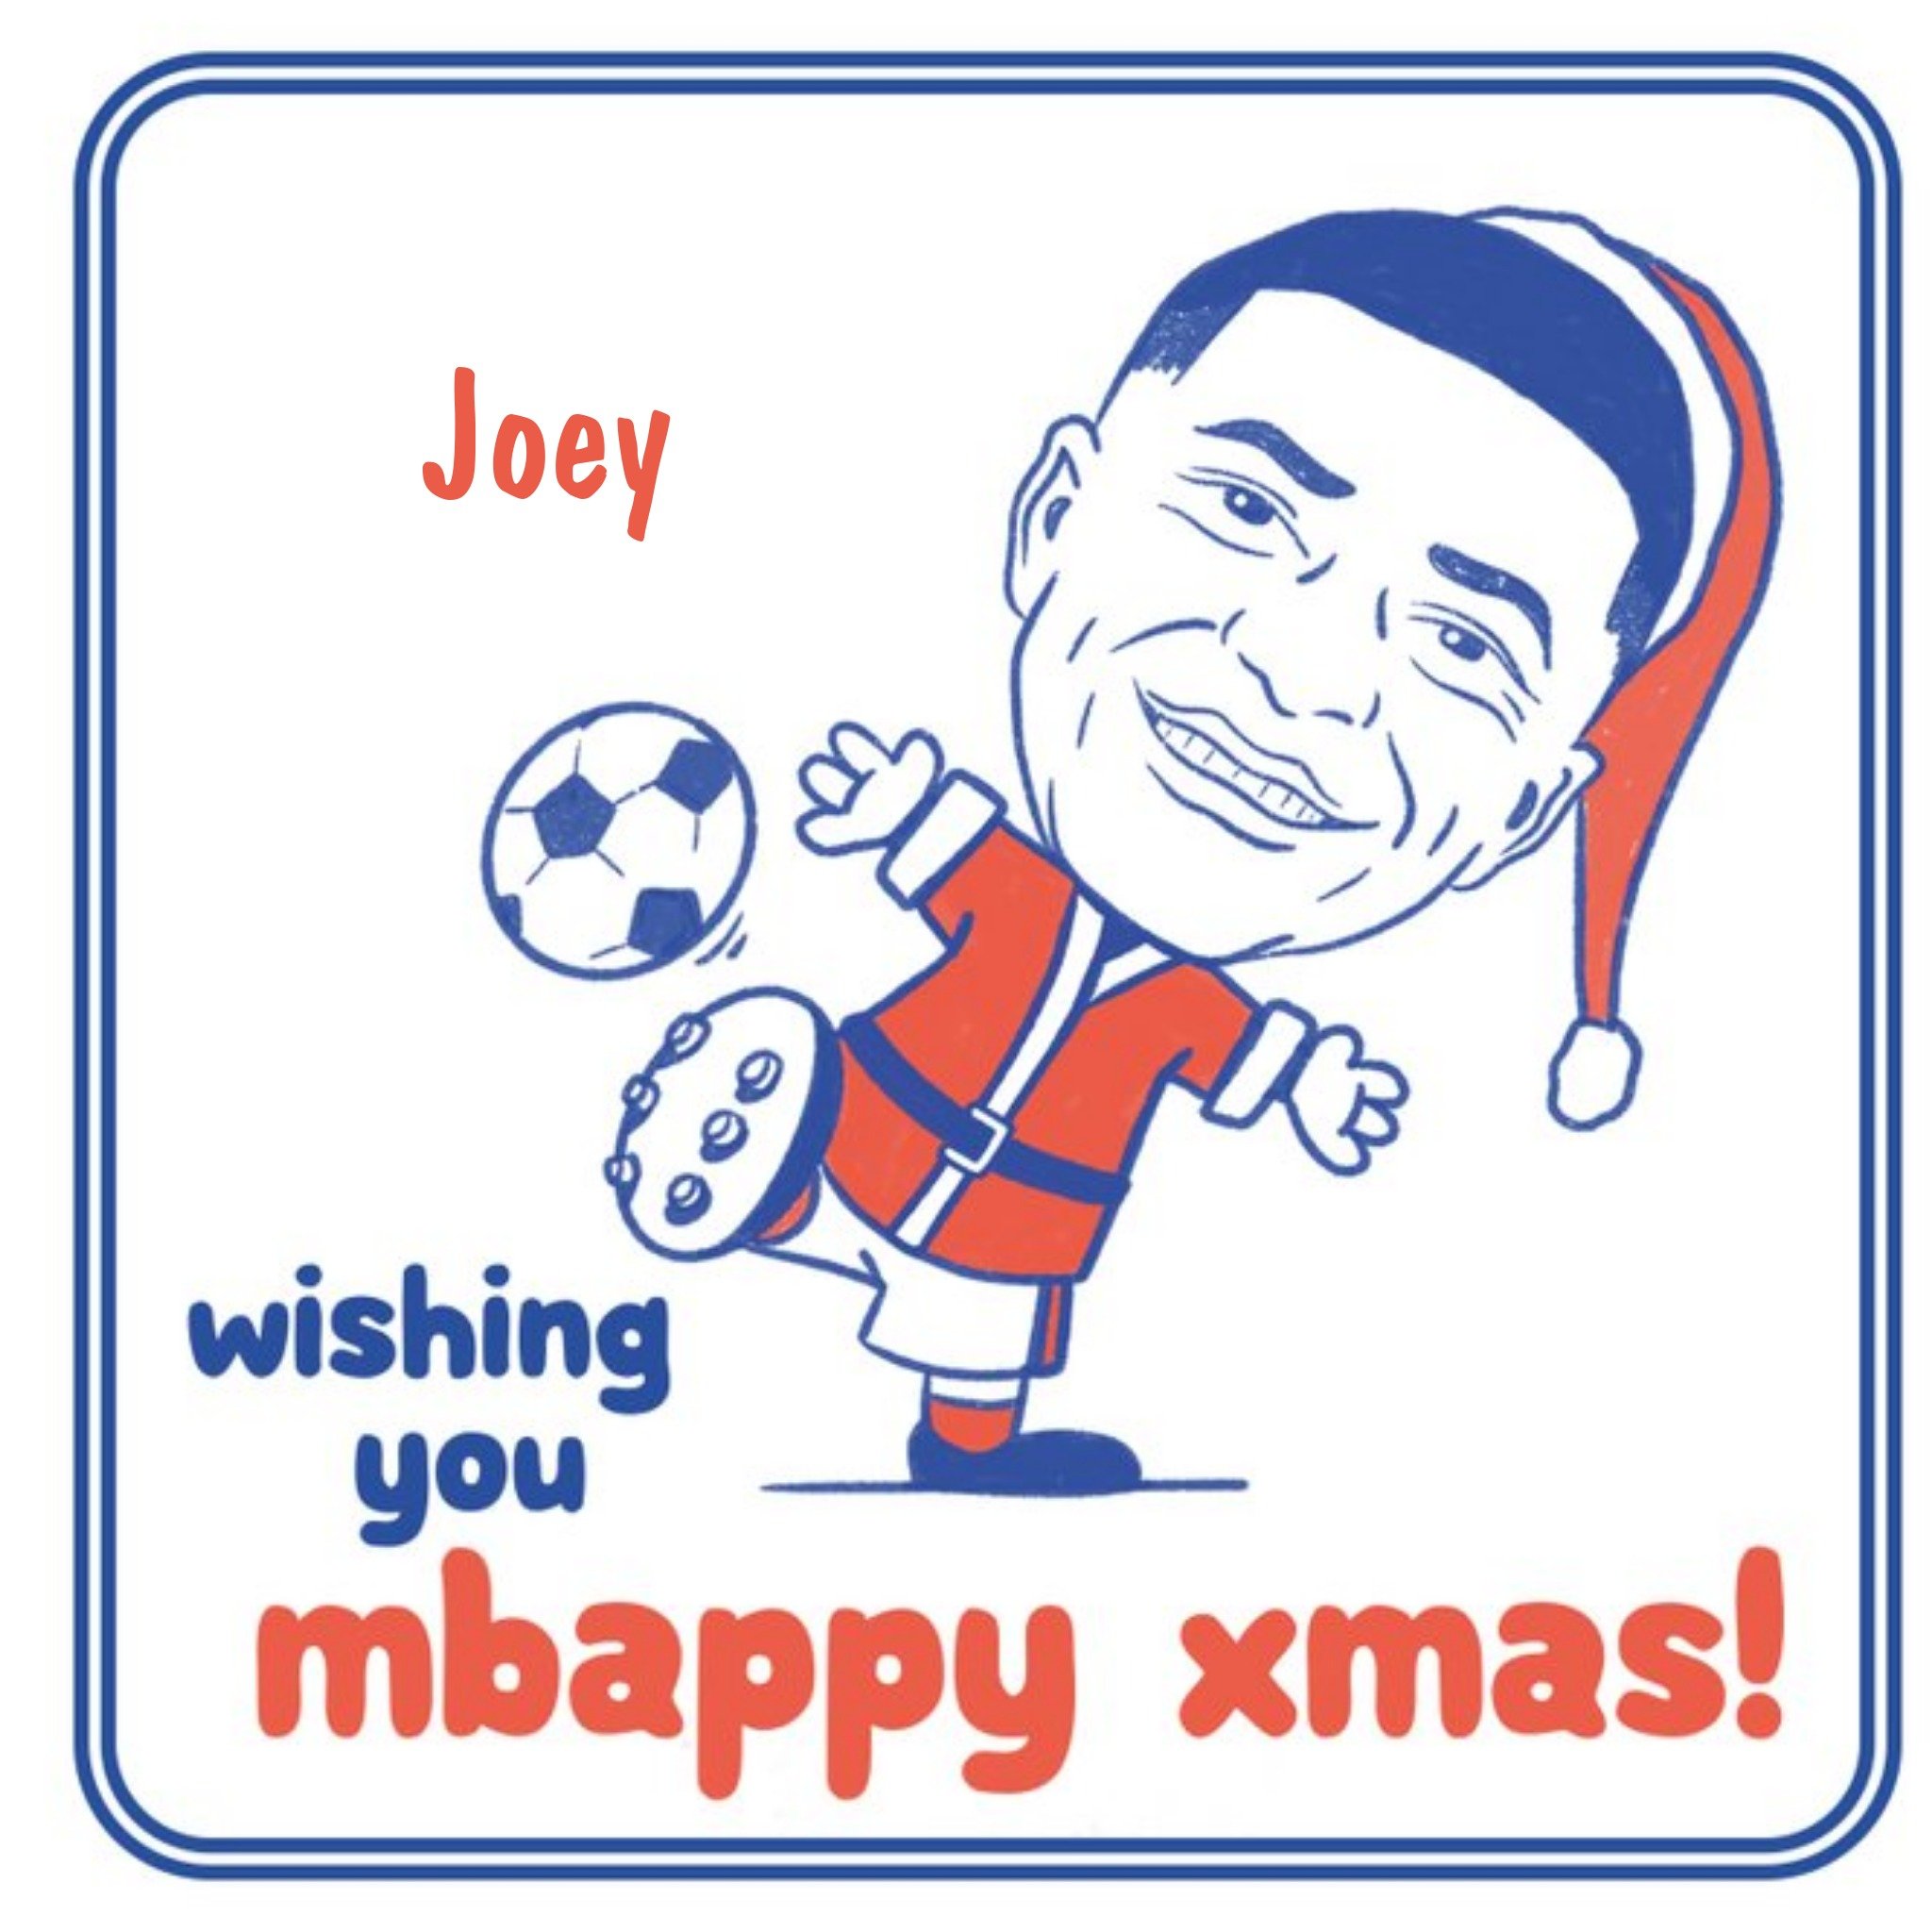 Moonpig Illustration Of A Footballer In A Santa Outfit Football Christmas Card, Square